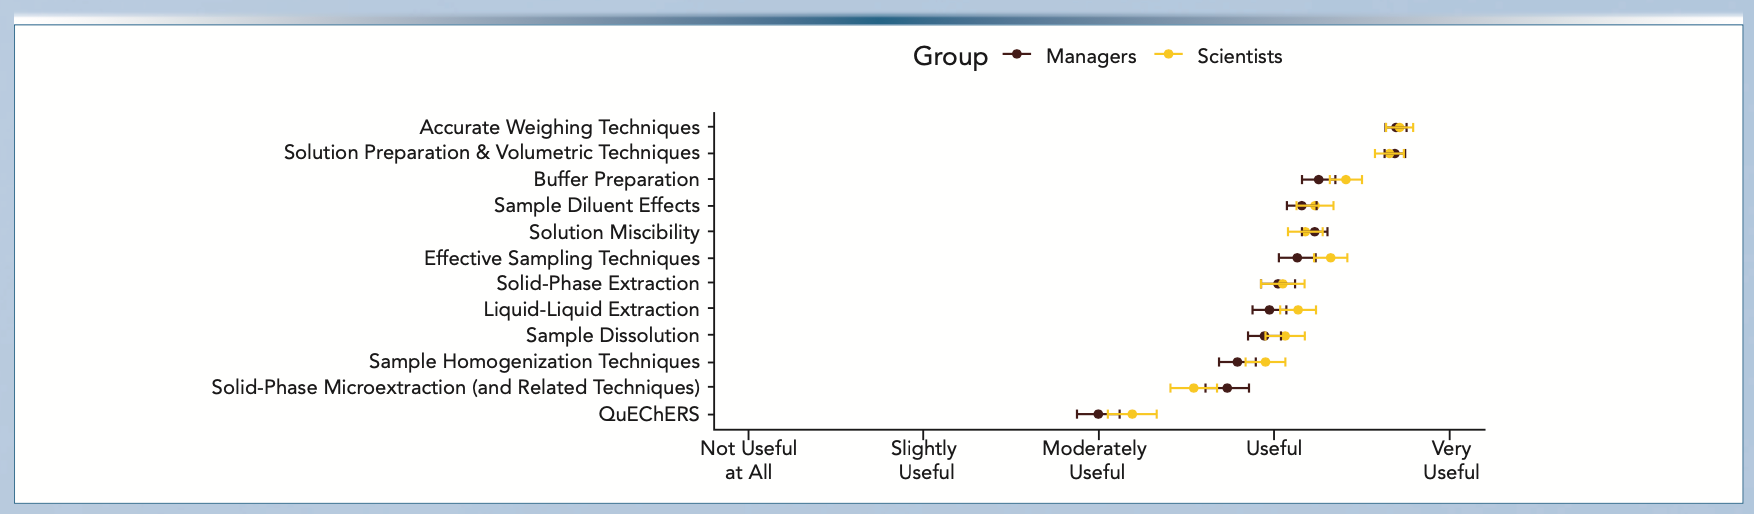 FIGURE 2: Summary of responses regarding the usefulness of sample preparation and laboratory techniques for new hires in the industry.